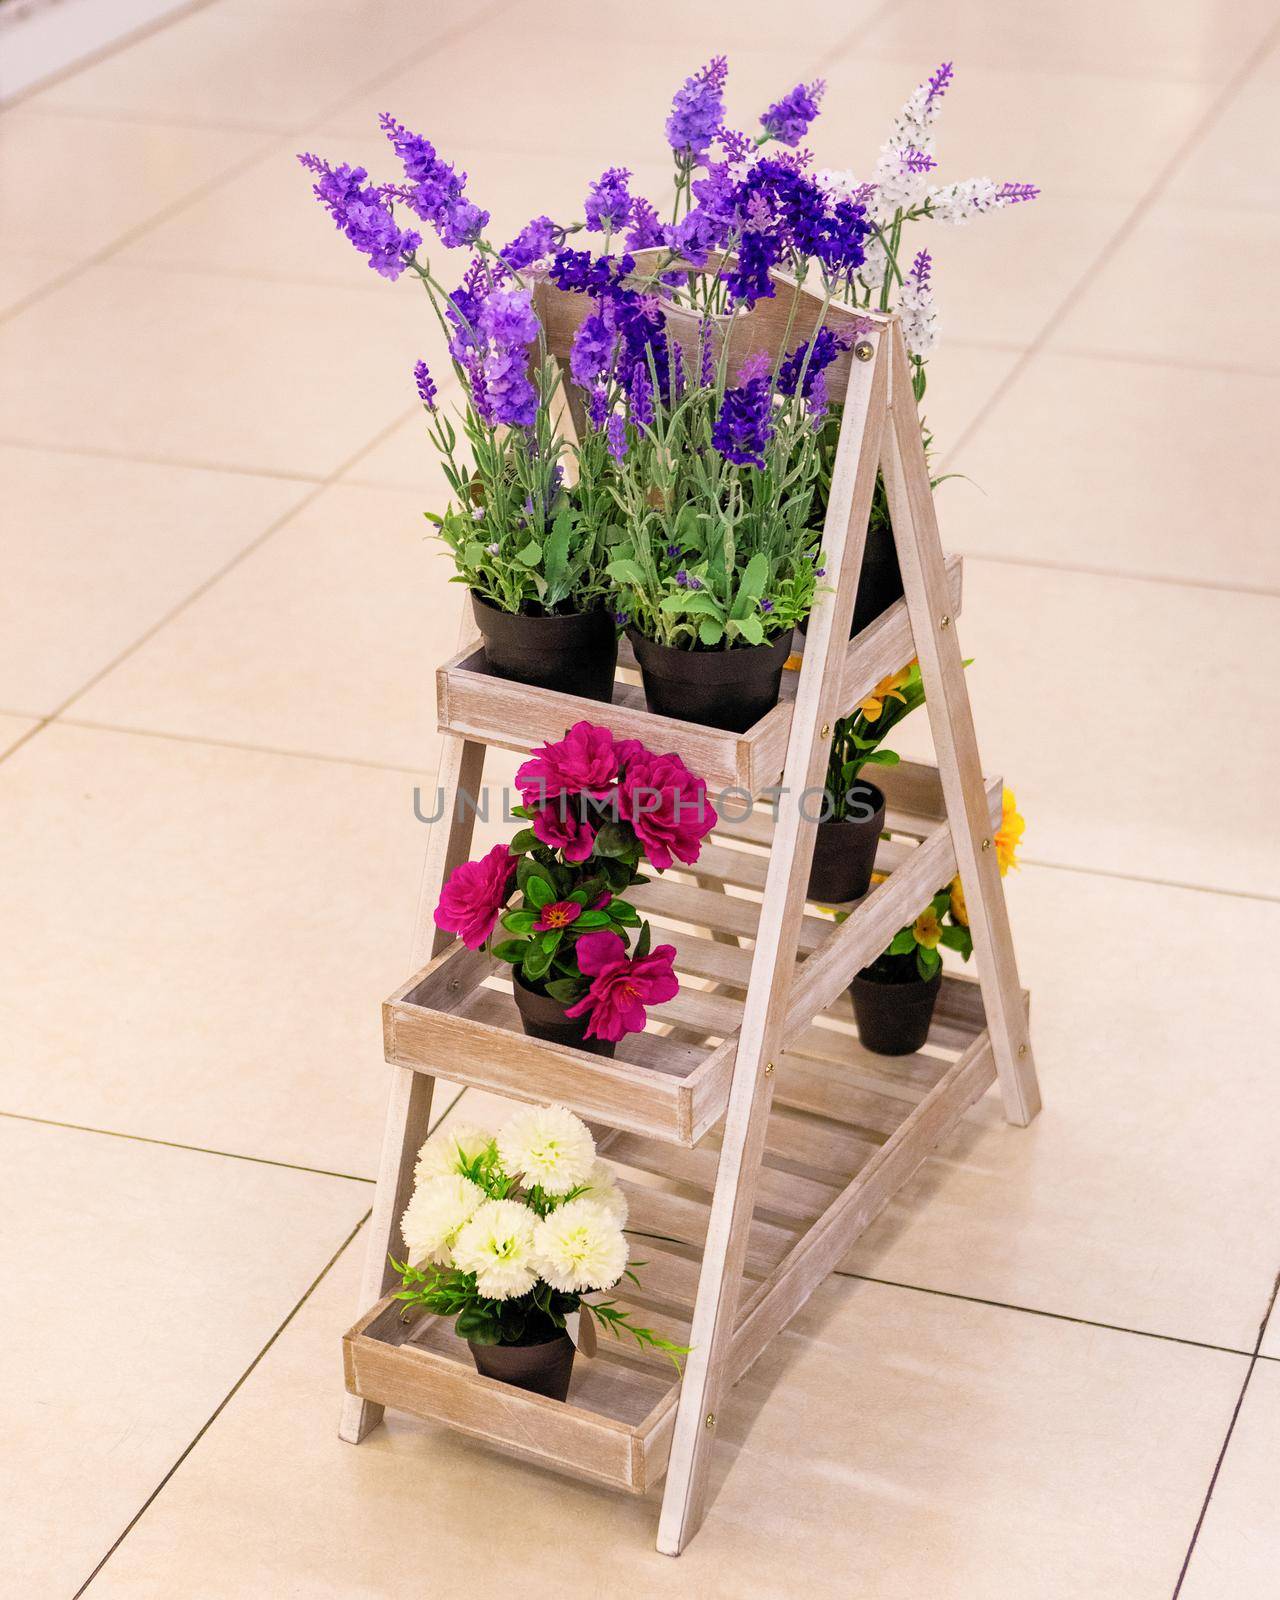 Artificial flower plants on the showcase